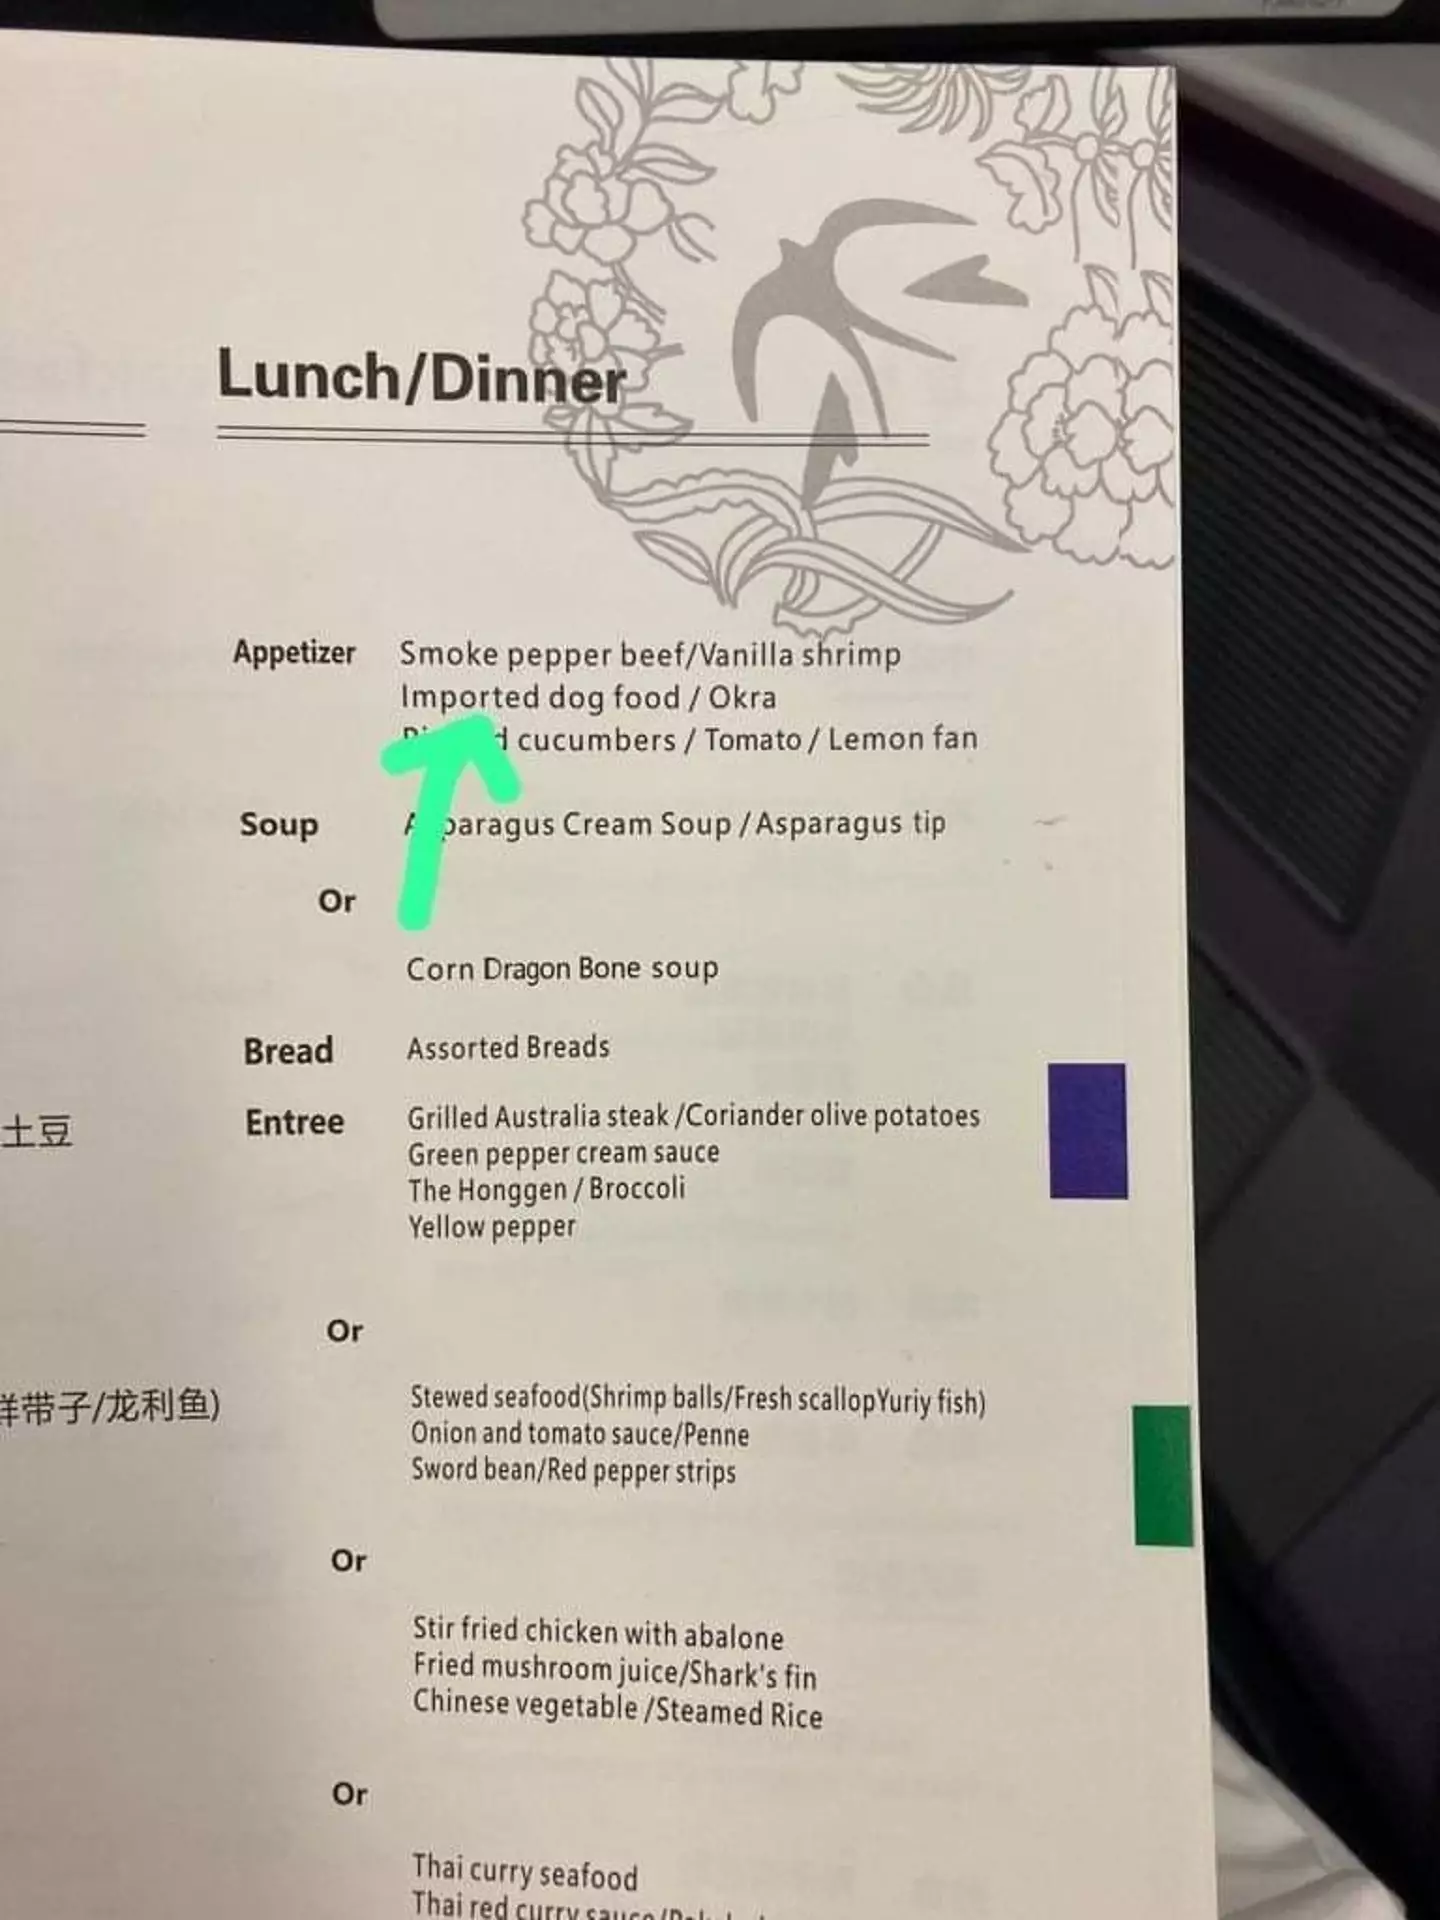 A passenger on a China Eastern Airlines flight shared an image of the business class food menu.